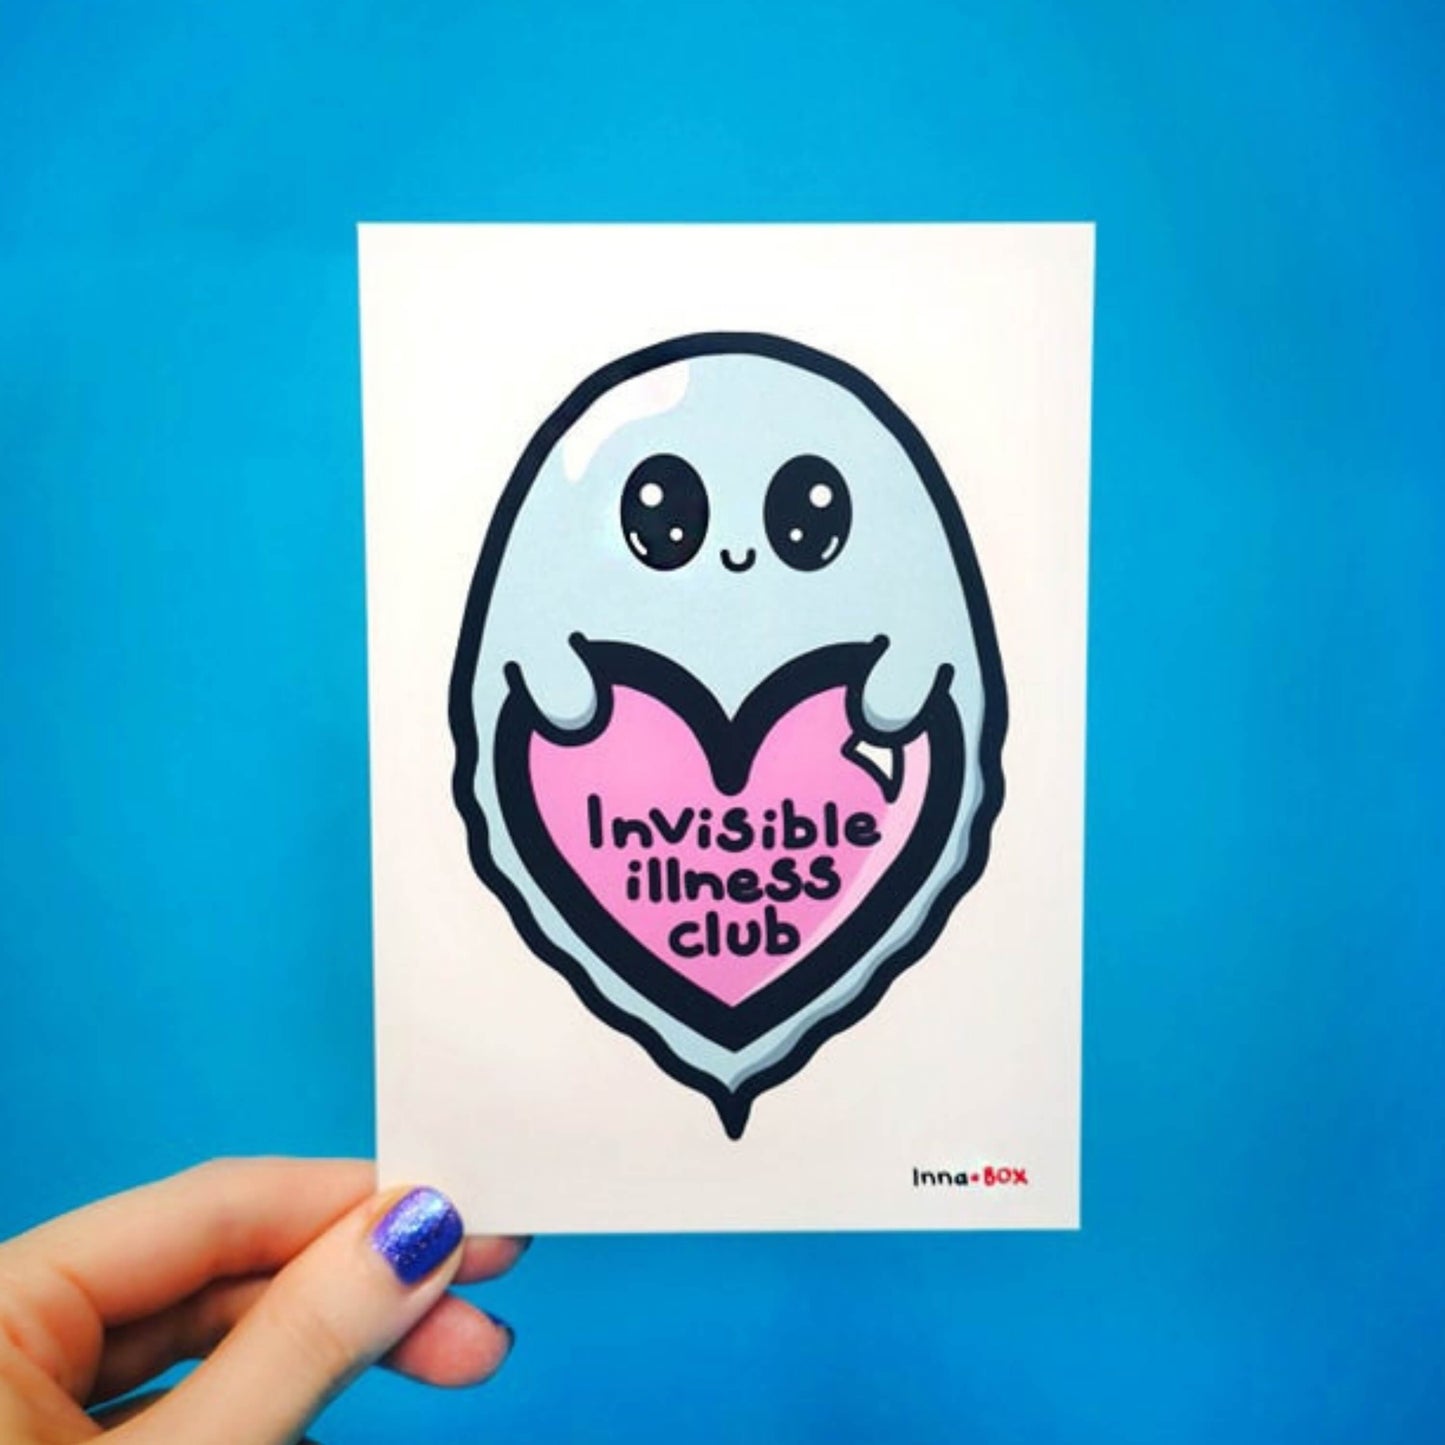 The Invisible Illness Club Postcard held over a blue background. The white postcard print features a pastel blue smiling ghost with big sparkly eyes holding up a pink heart with black text reading 'invisible illness club' with the innabox logo in the bottom right corner. The hand drawn design is raising awareness for hidden disabilities and chronic illness.